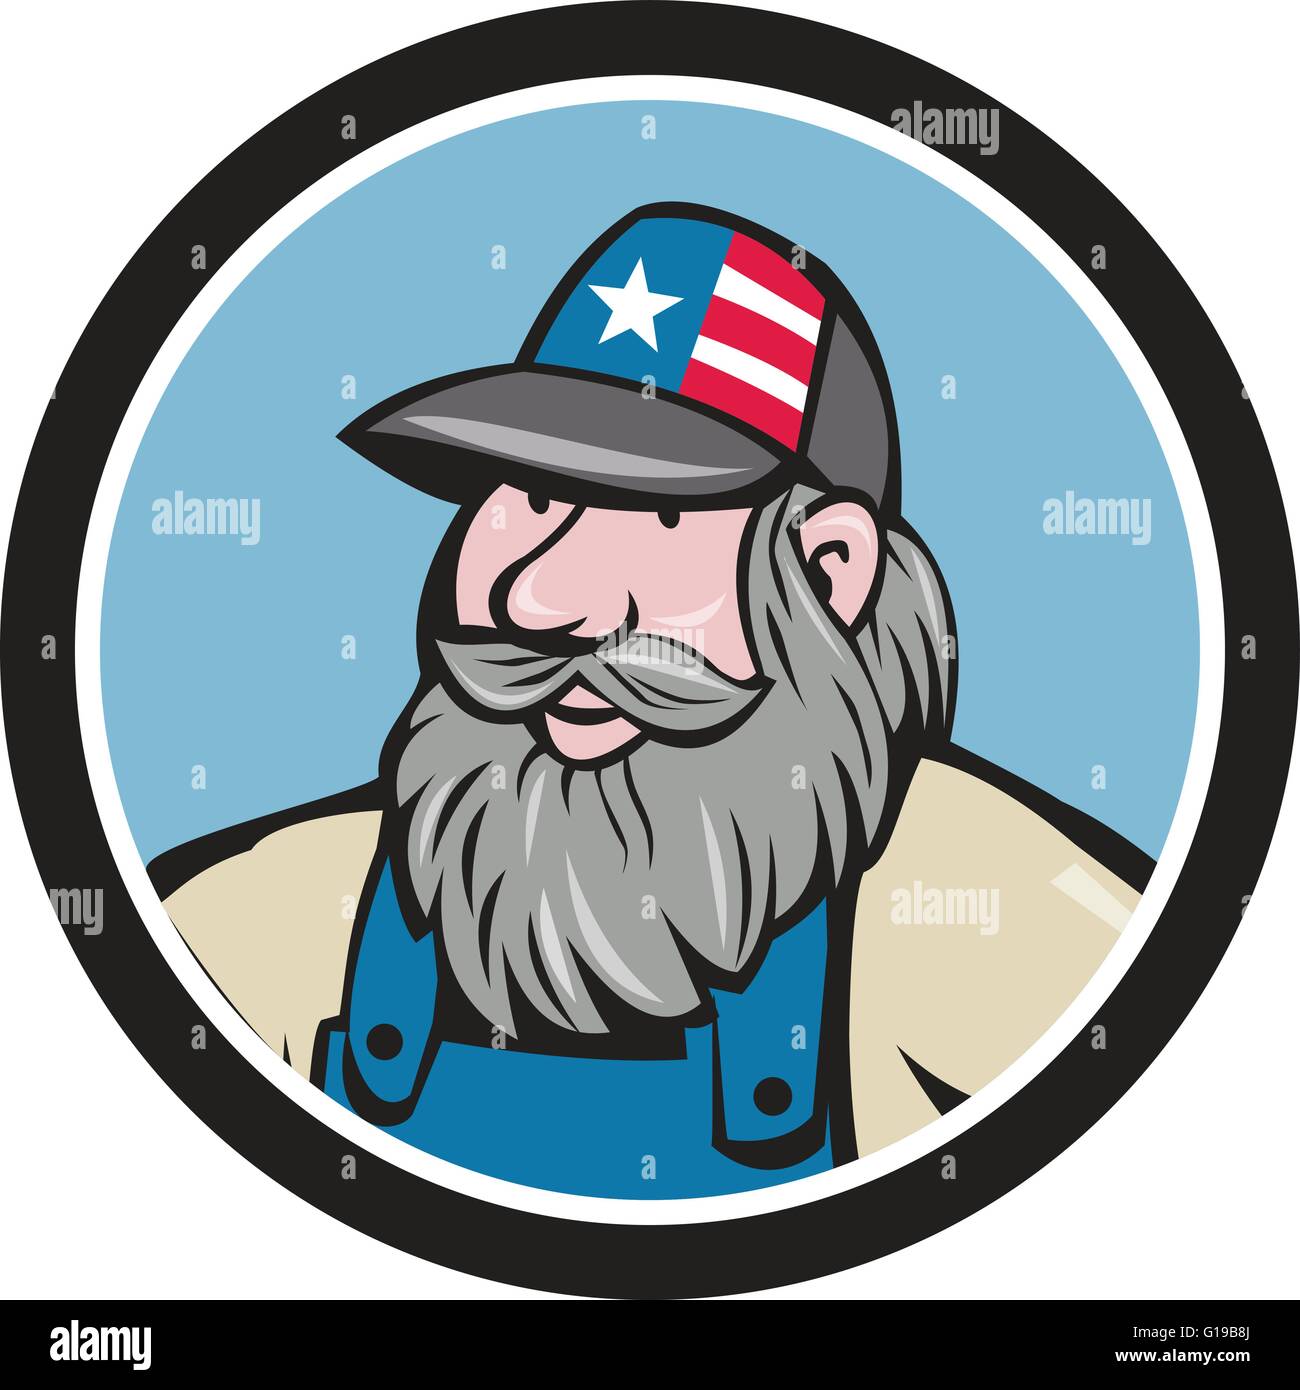 Illustration of a head of hillbilly man with beard wearing hat with stars and stripes looking to the side viewed from front set Stock Vector